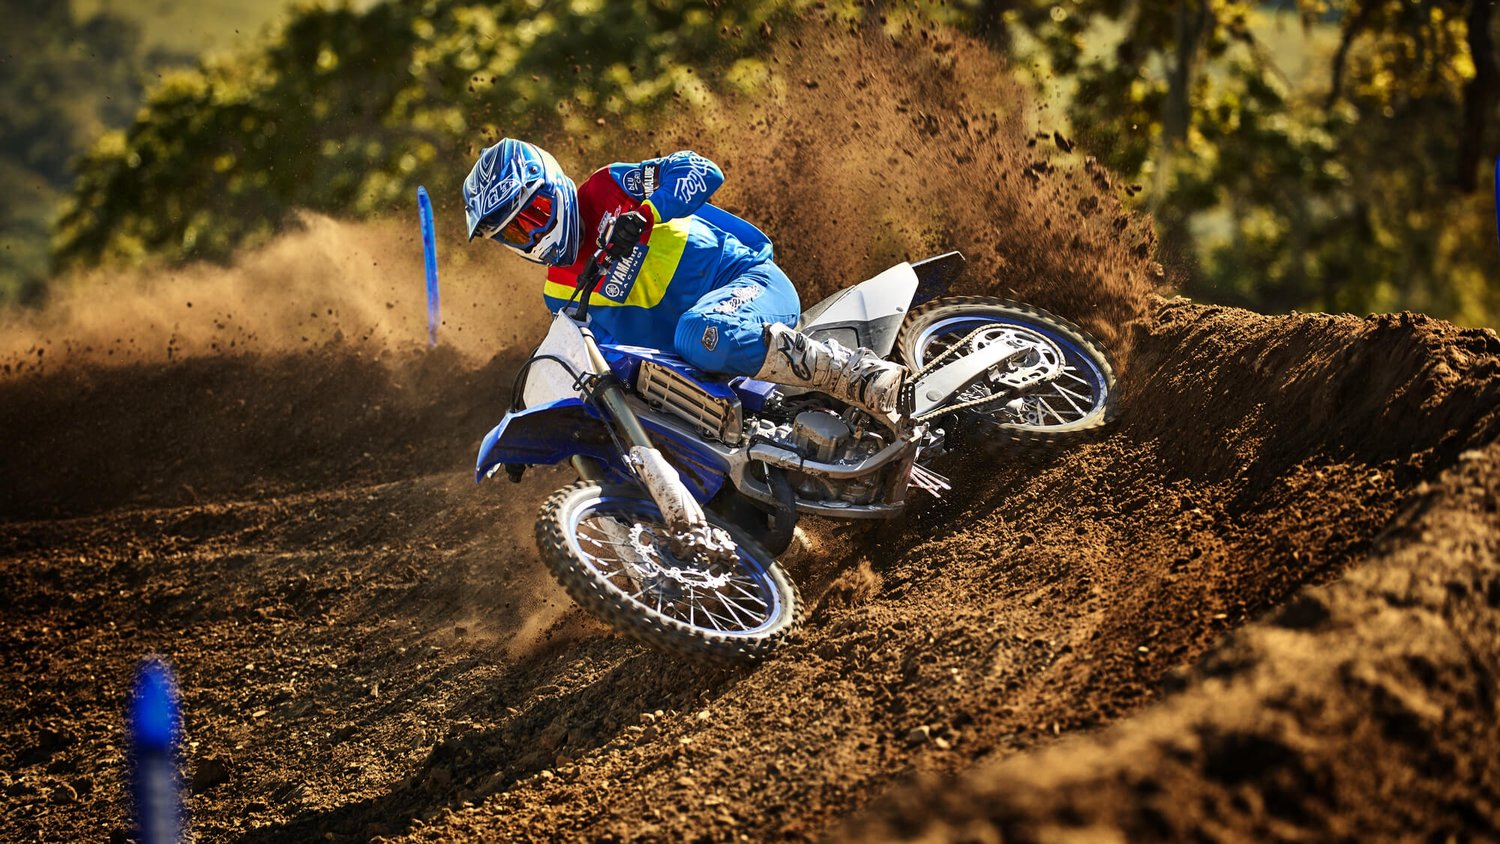 7 Of The Lightest Dirt Bikes Of The Modern Age — Dirt Legal